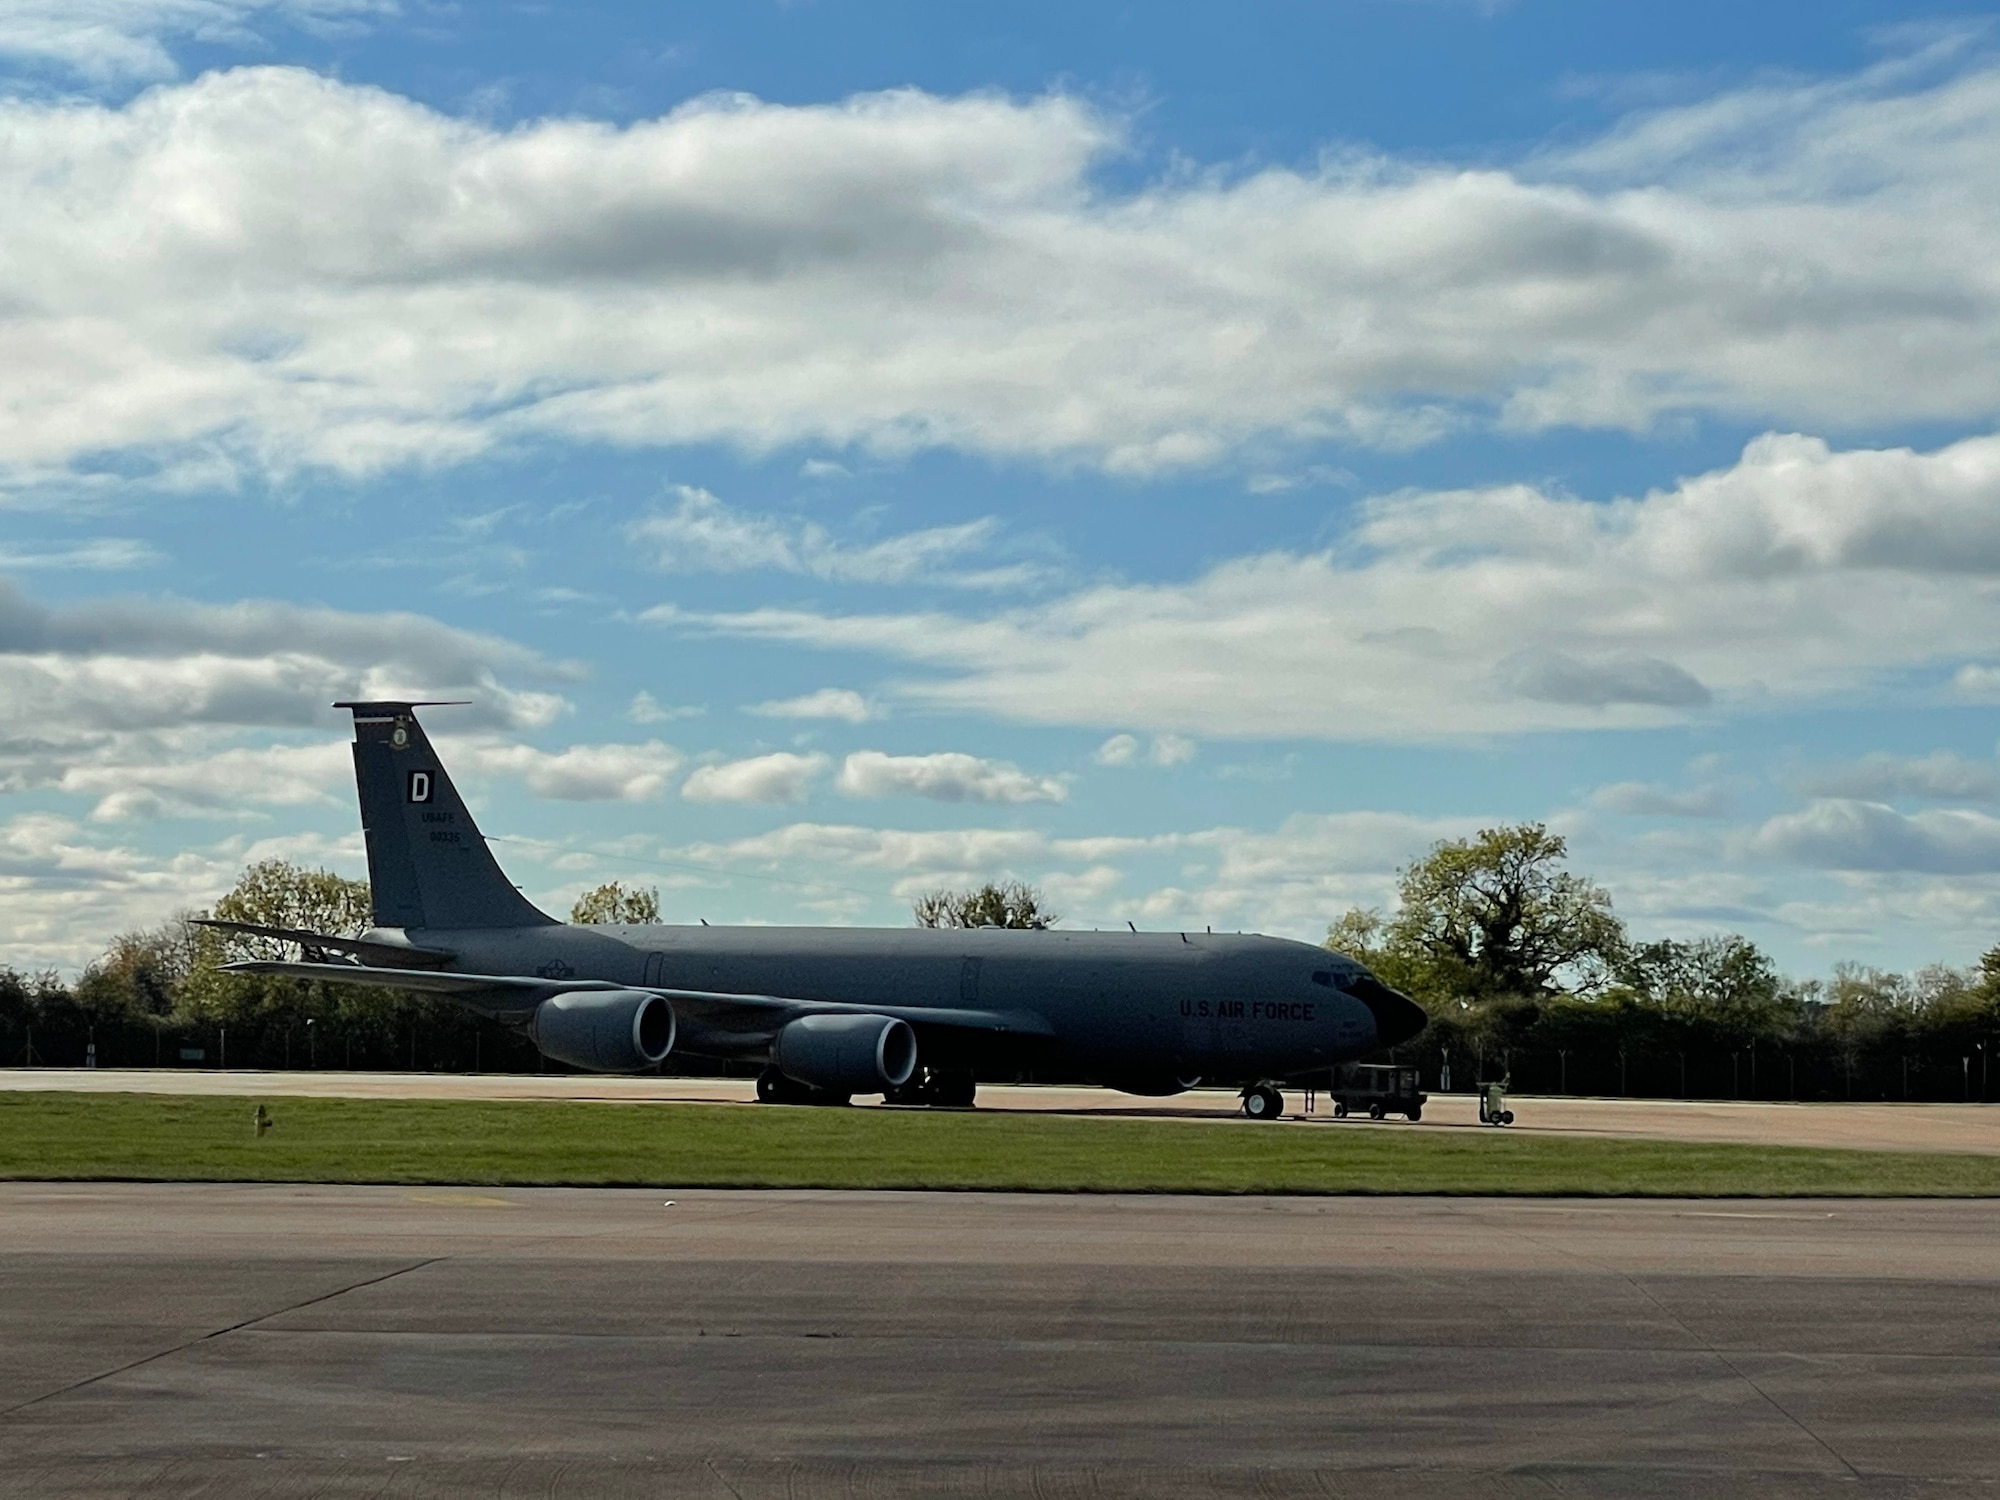 A U.S. Air Force KC-135 Stratotanker aircraft assigned to the 100th Air Refueling Wing, Royal Air Force Mildenhall, England, sits on the flightline during exercise Castle Forge at RAF Fairford, England, Nov. 4, 2021. The U.S. Air Force’s forward-deployed forces are engaged, postured and ready with credible force to assure, deter and defend in an increasingly complex security environment. In addition to F-15 Eagle aircraft operations in the Black Sea Region, Castle Forge encompasses the USAFE-wide Agile Combat Employment capstone event. Castle Forge’s components will better enable forces to quickly disperse and continue to deliver air power from locations with varying levels of capacity and support, ensuring Airmen are always ready to respond to potential threats (U.S. Air Force photo by Senior Airman Joseph Barron)